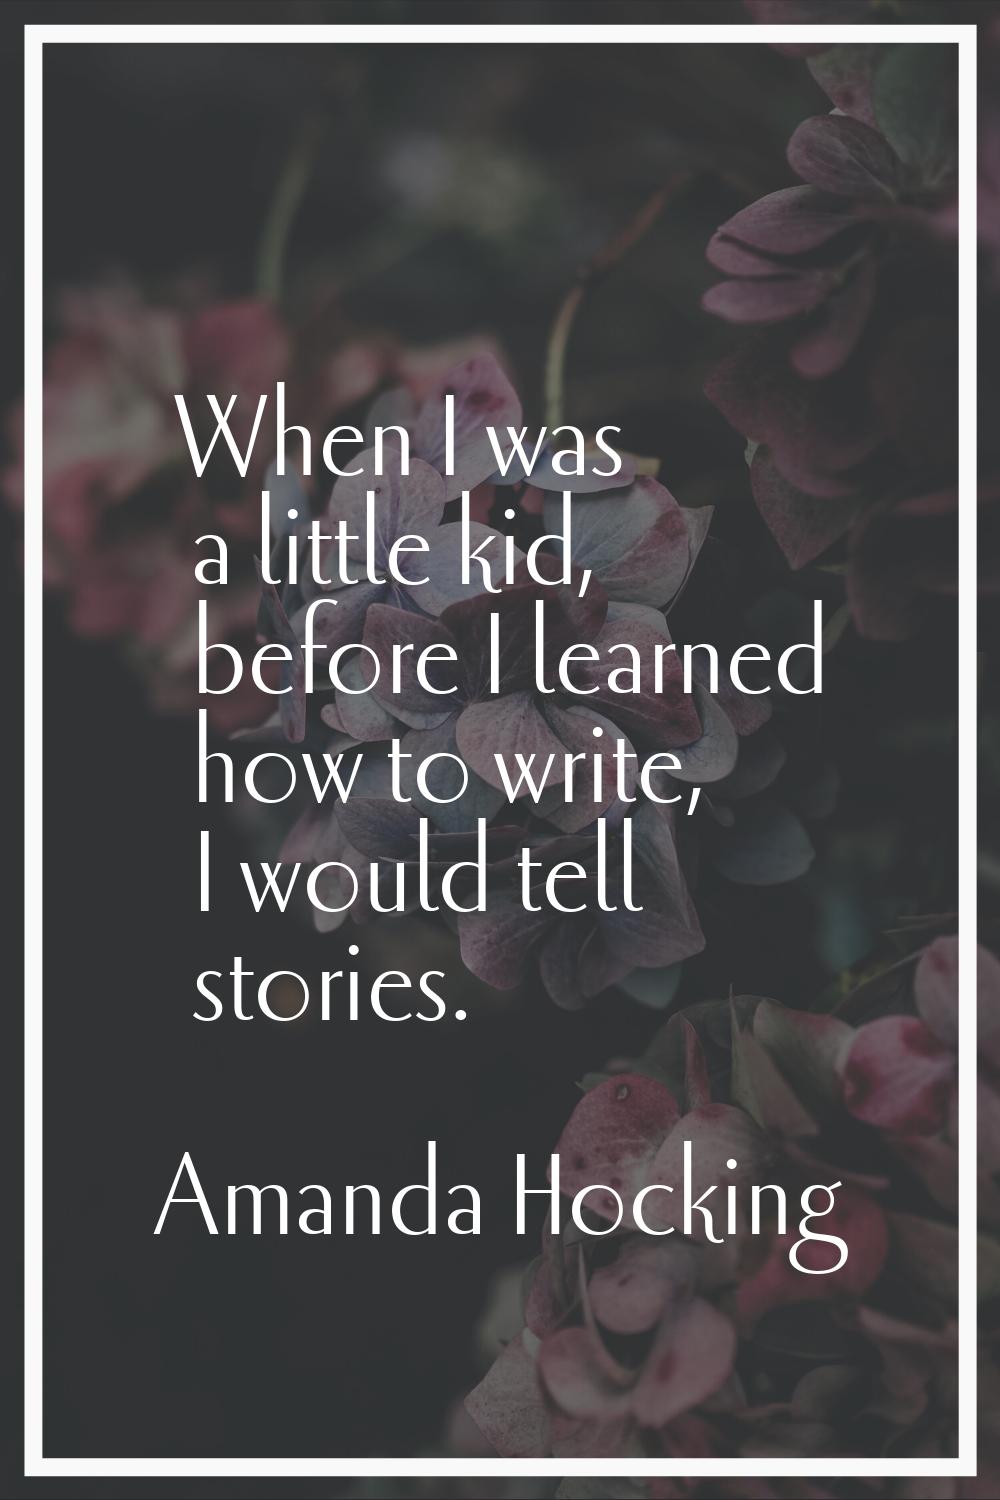 When I was a little kid, before I learned how to write, I would tell stories.